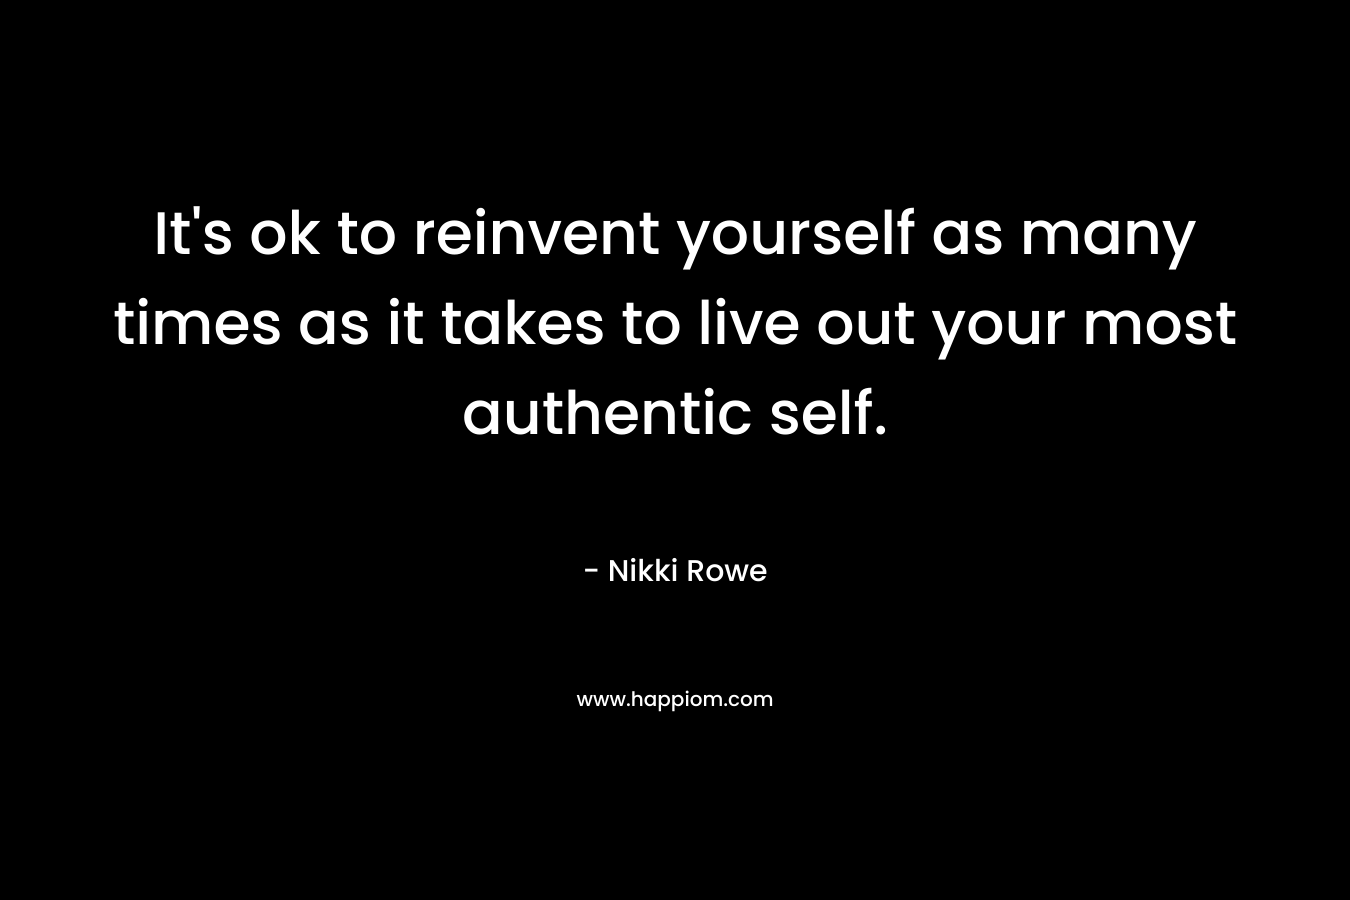 It’s ok to reinvent yourself as many times as it takes to live out your most authentic self. – Nikki Rowe